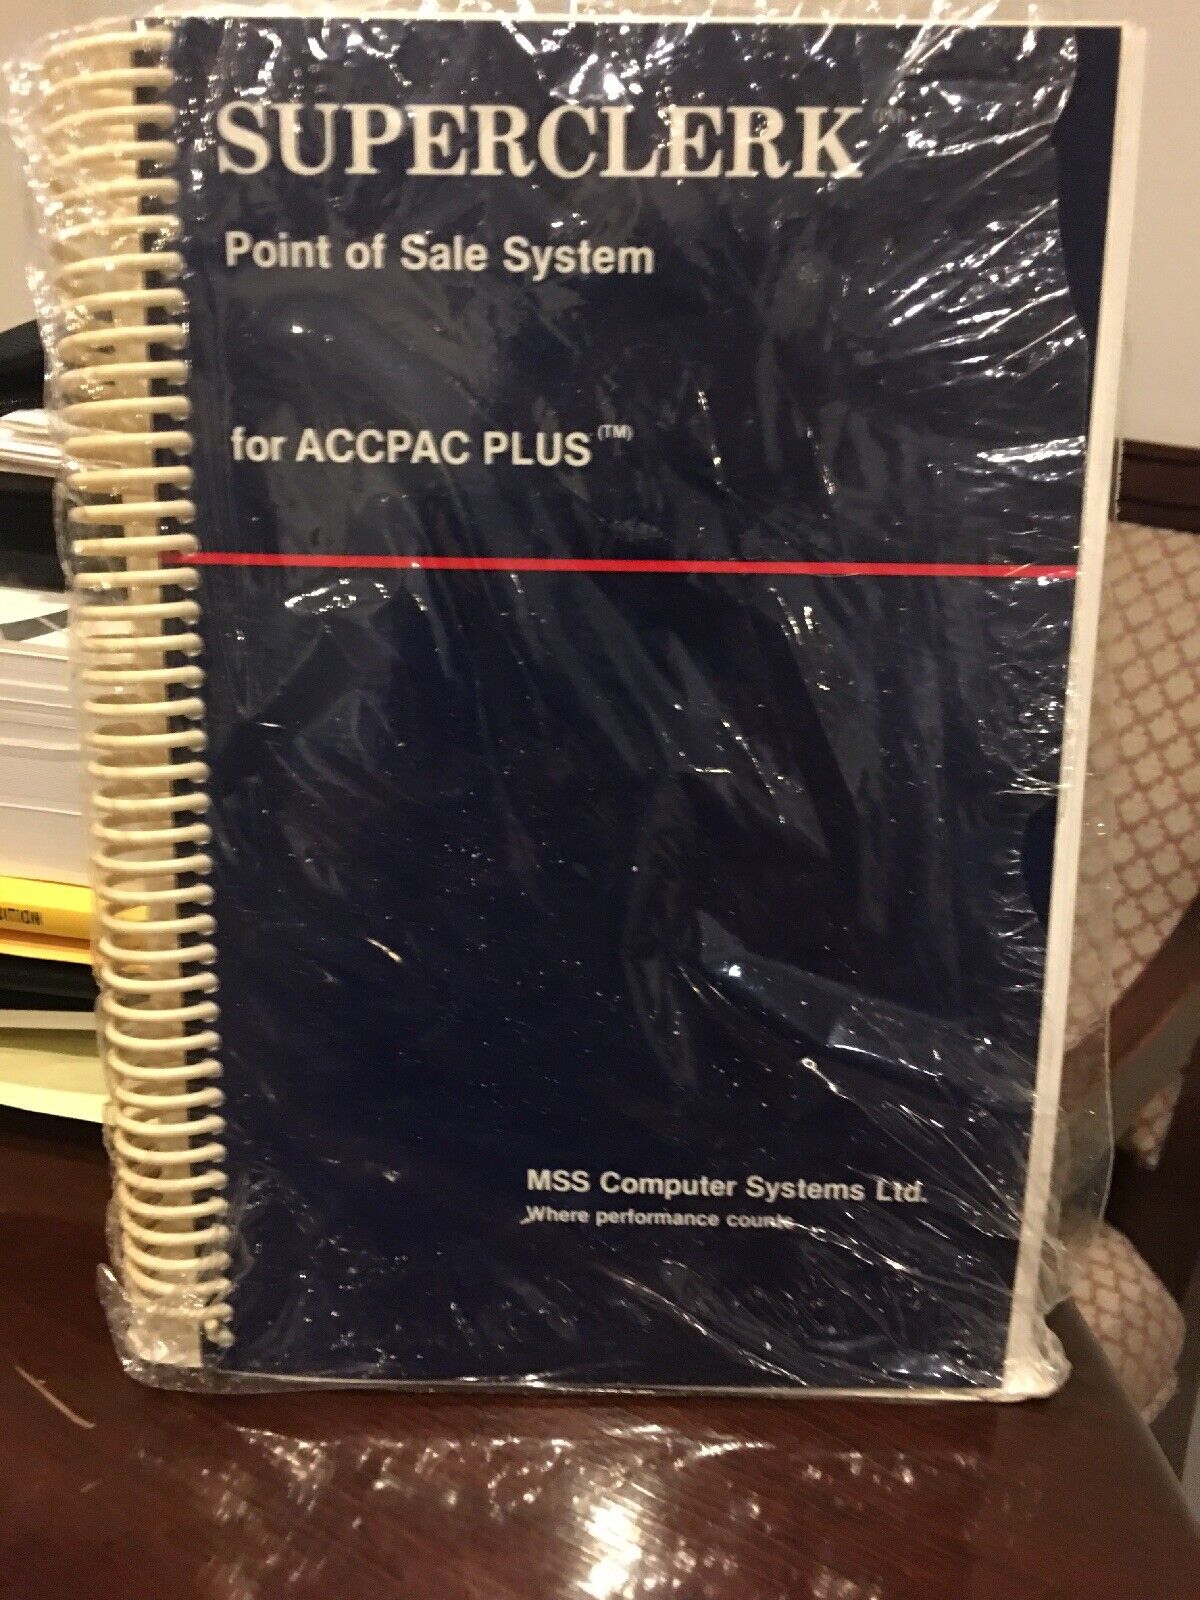 $795 BRAND NEW SEALED Accpac Plus Accounting Companion Product. SUPERCLERK POS.